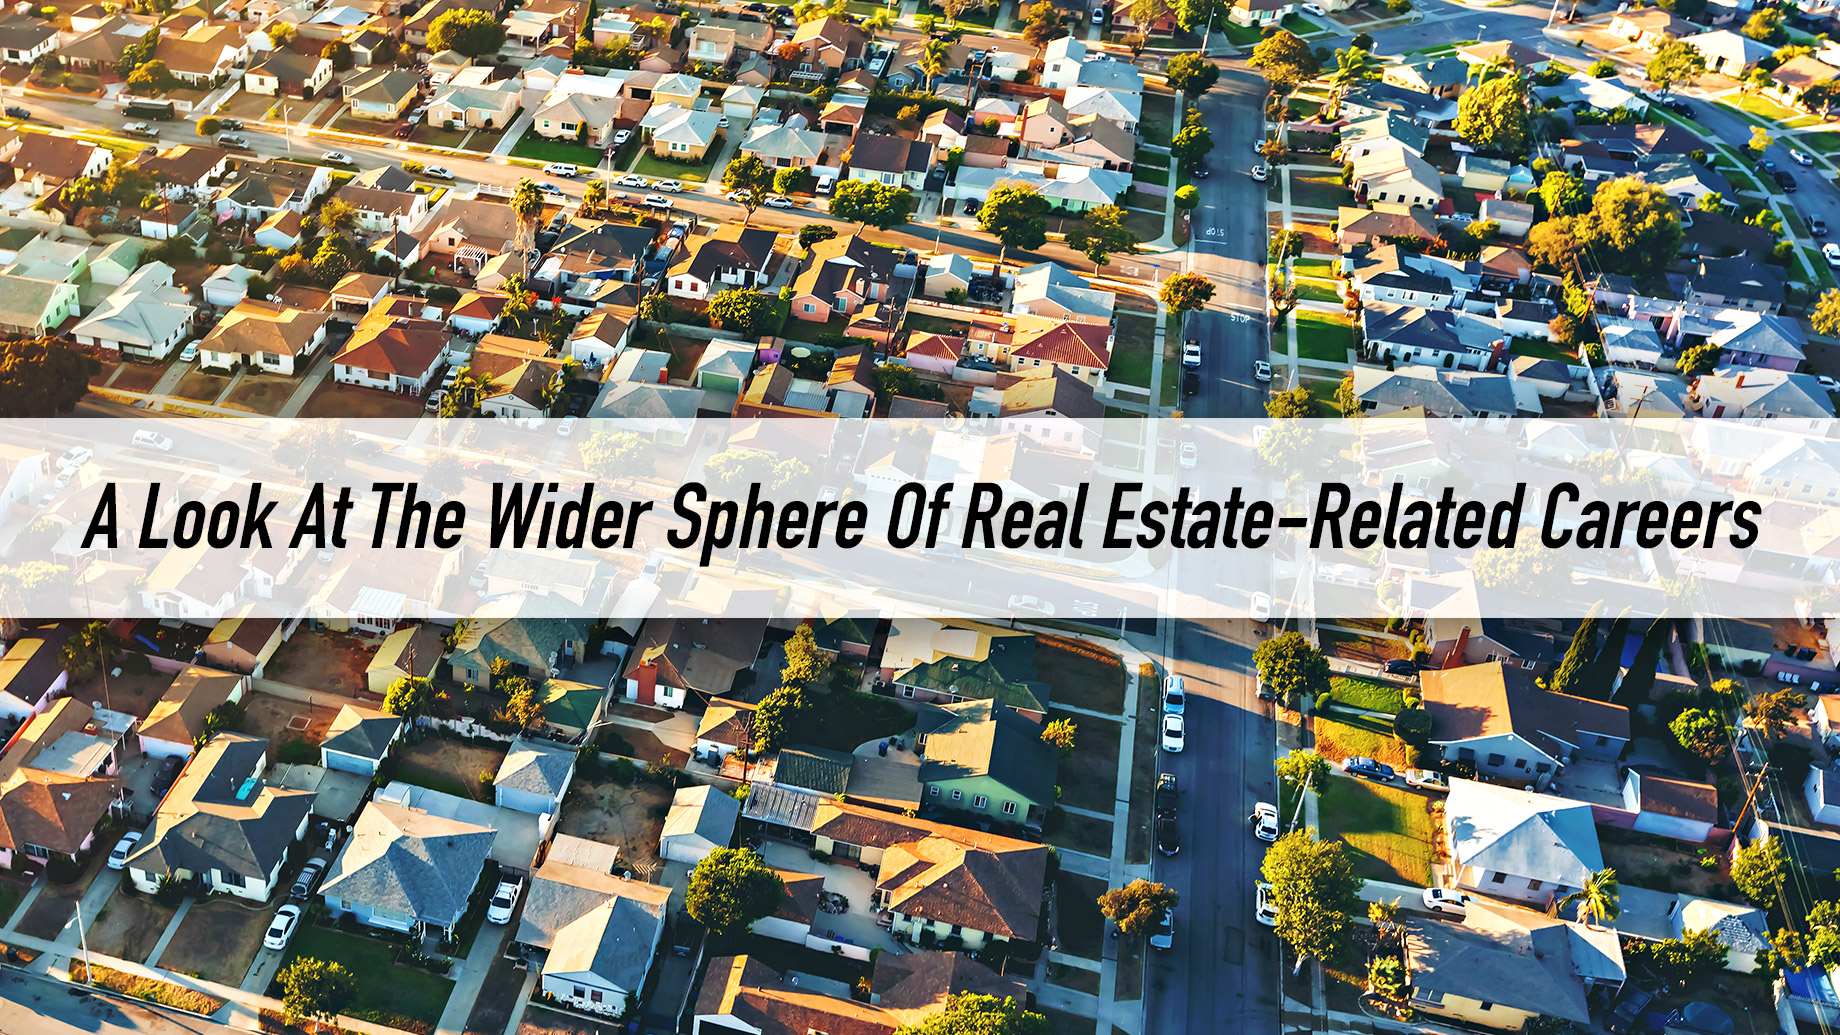 A Look At The Wider Sphere Of Real Estate-Related Careers